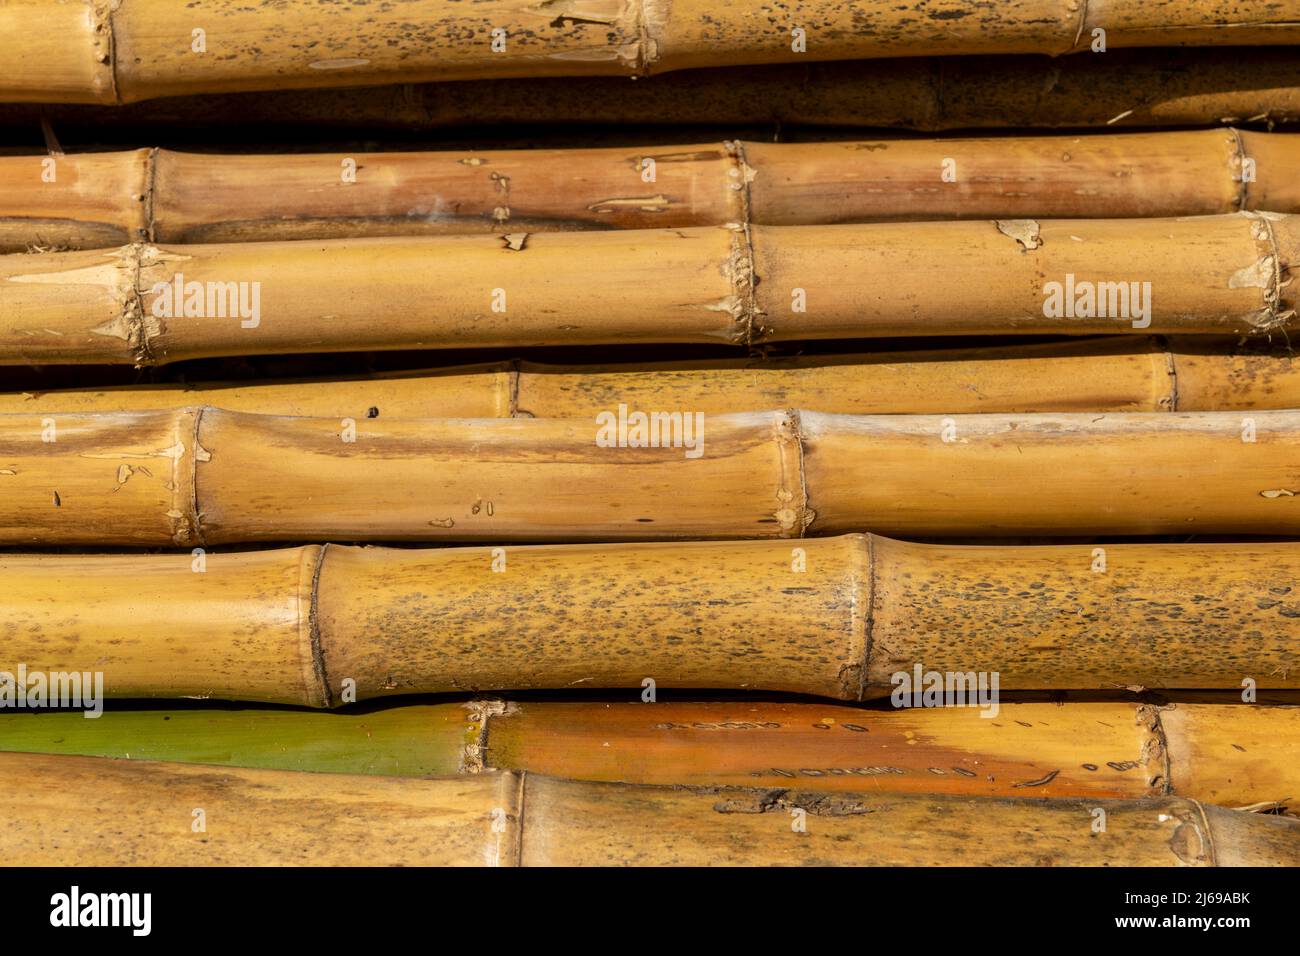 Row of bamboo canes, full frame. Stock Photo